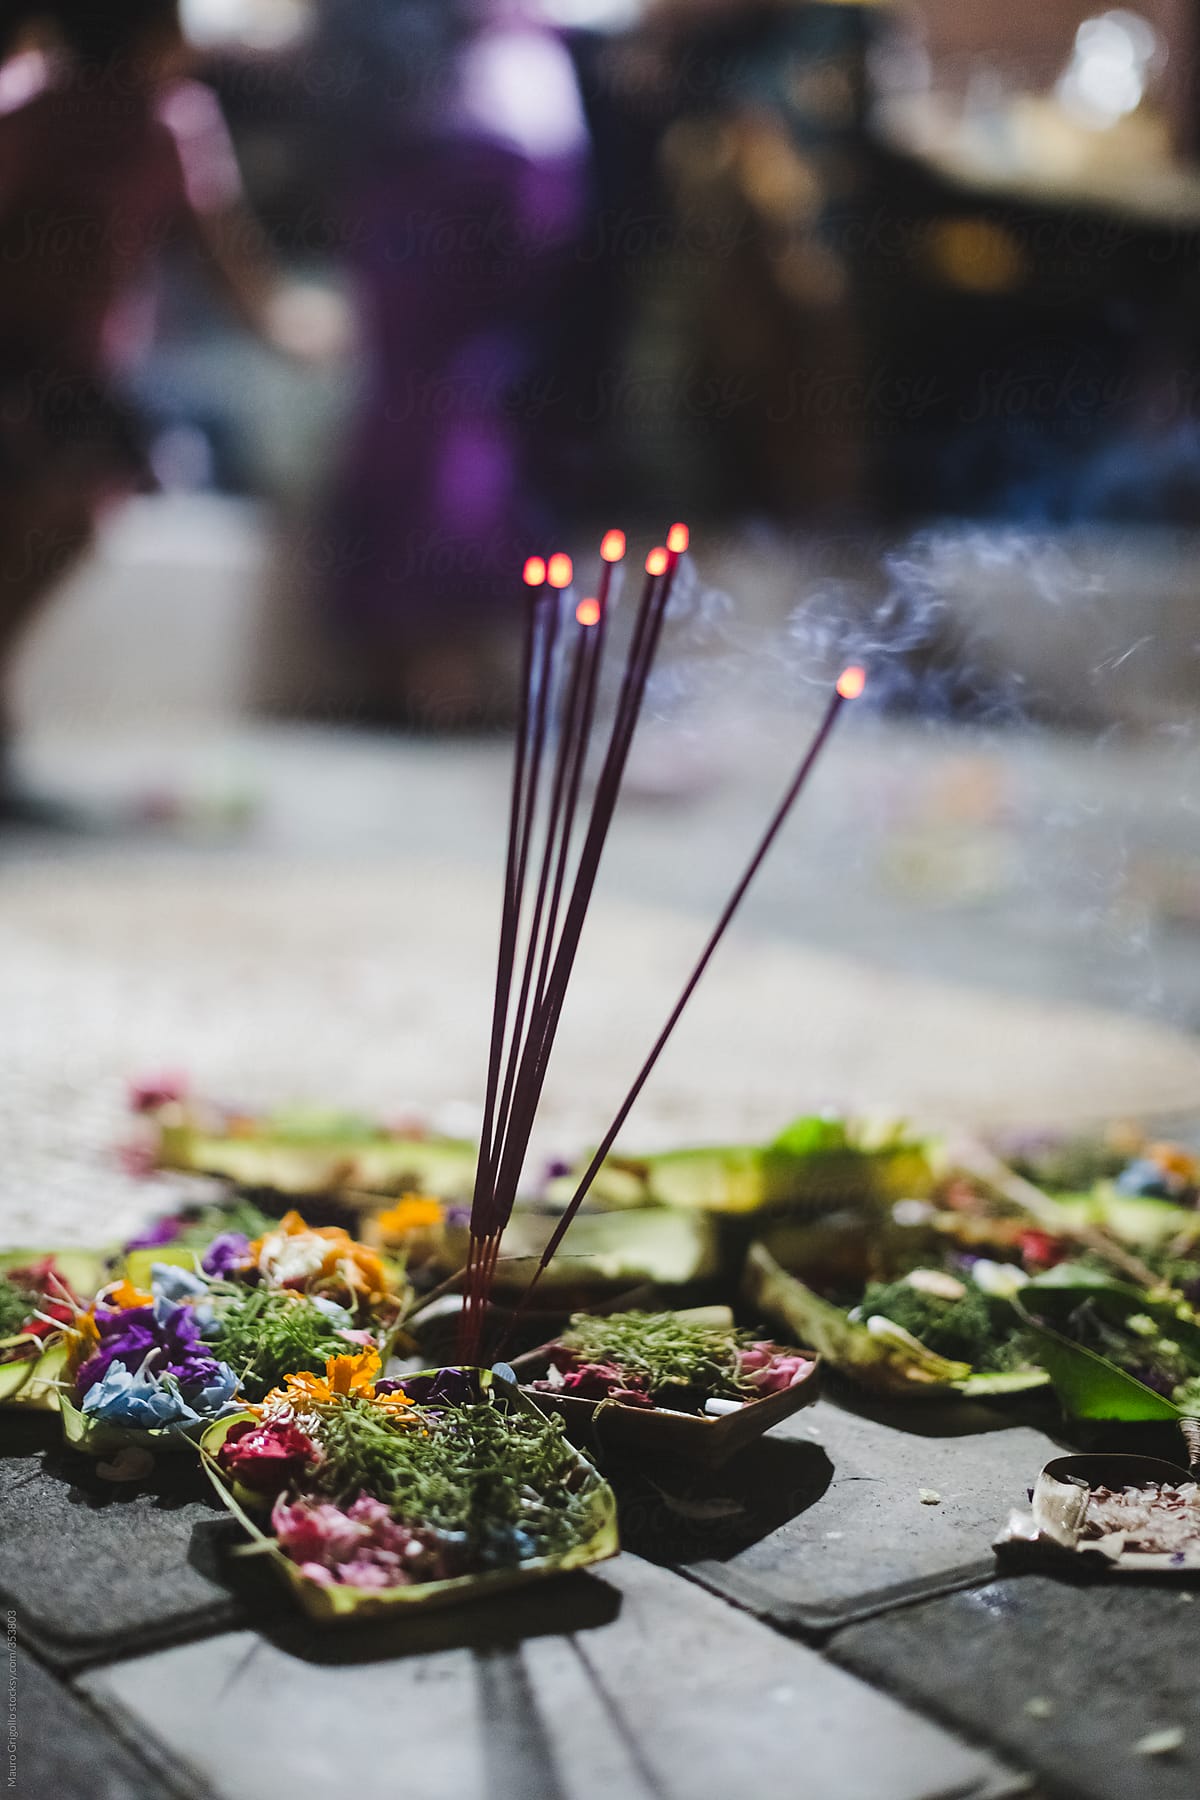 Flower Offering in a Temple in Bali, Indonesia